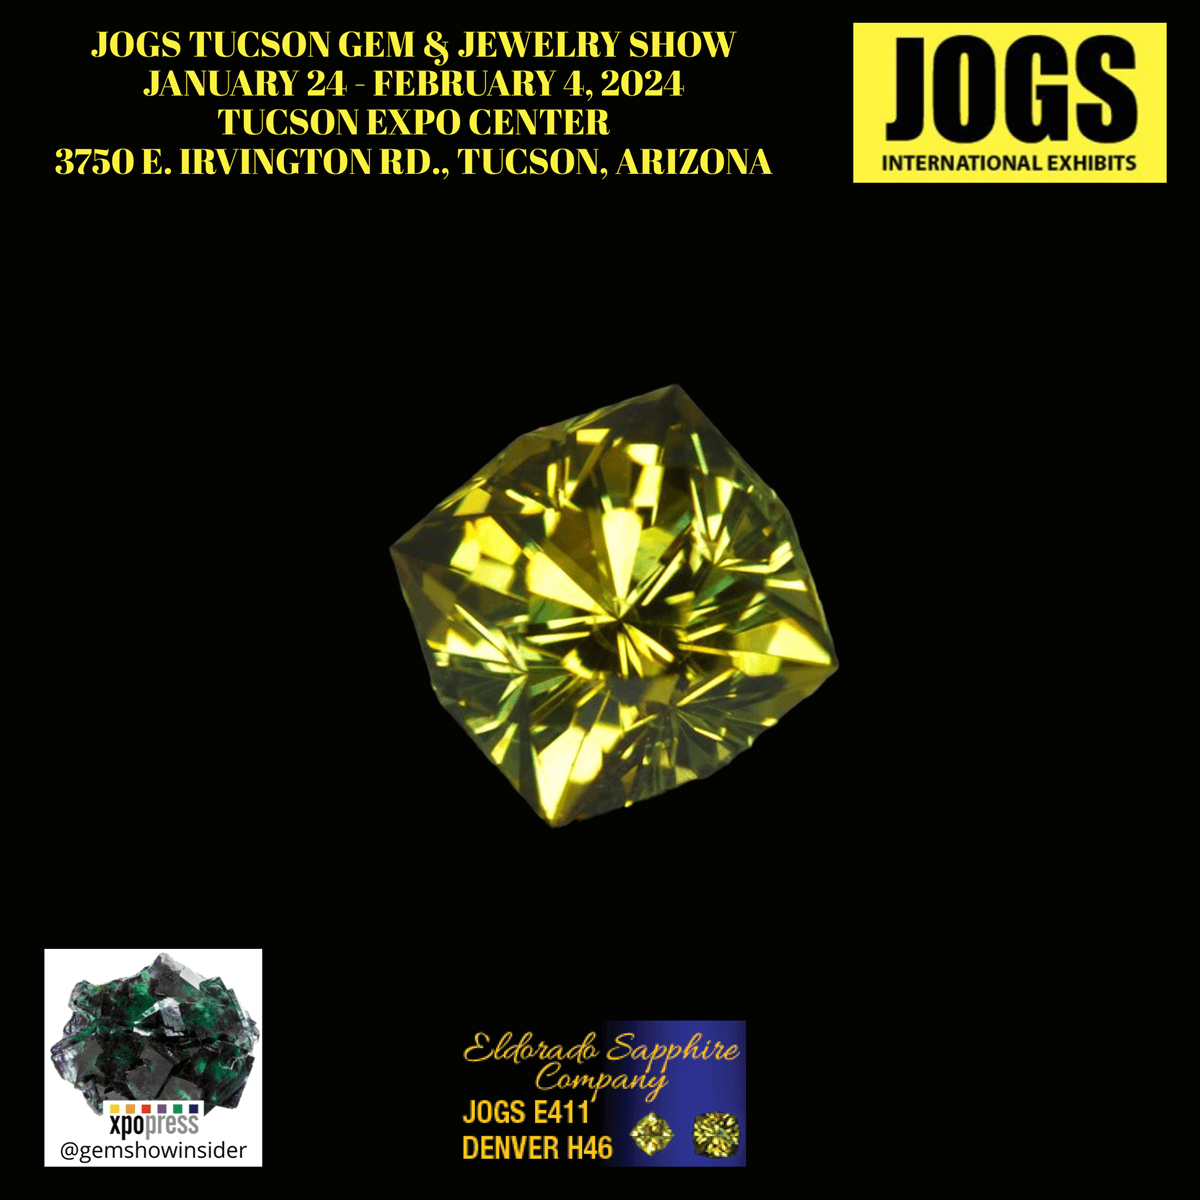 JOGS Tucson Gem and Jewelry Show 2024